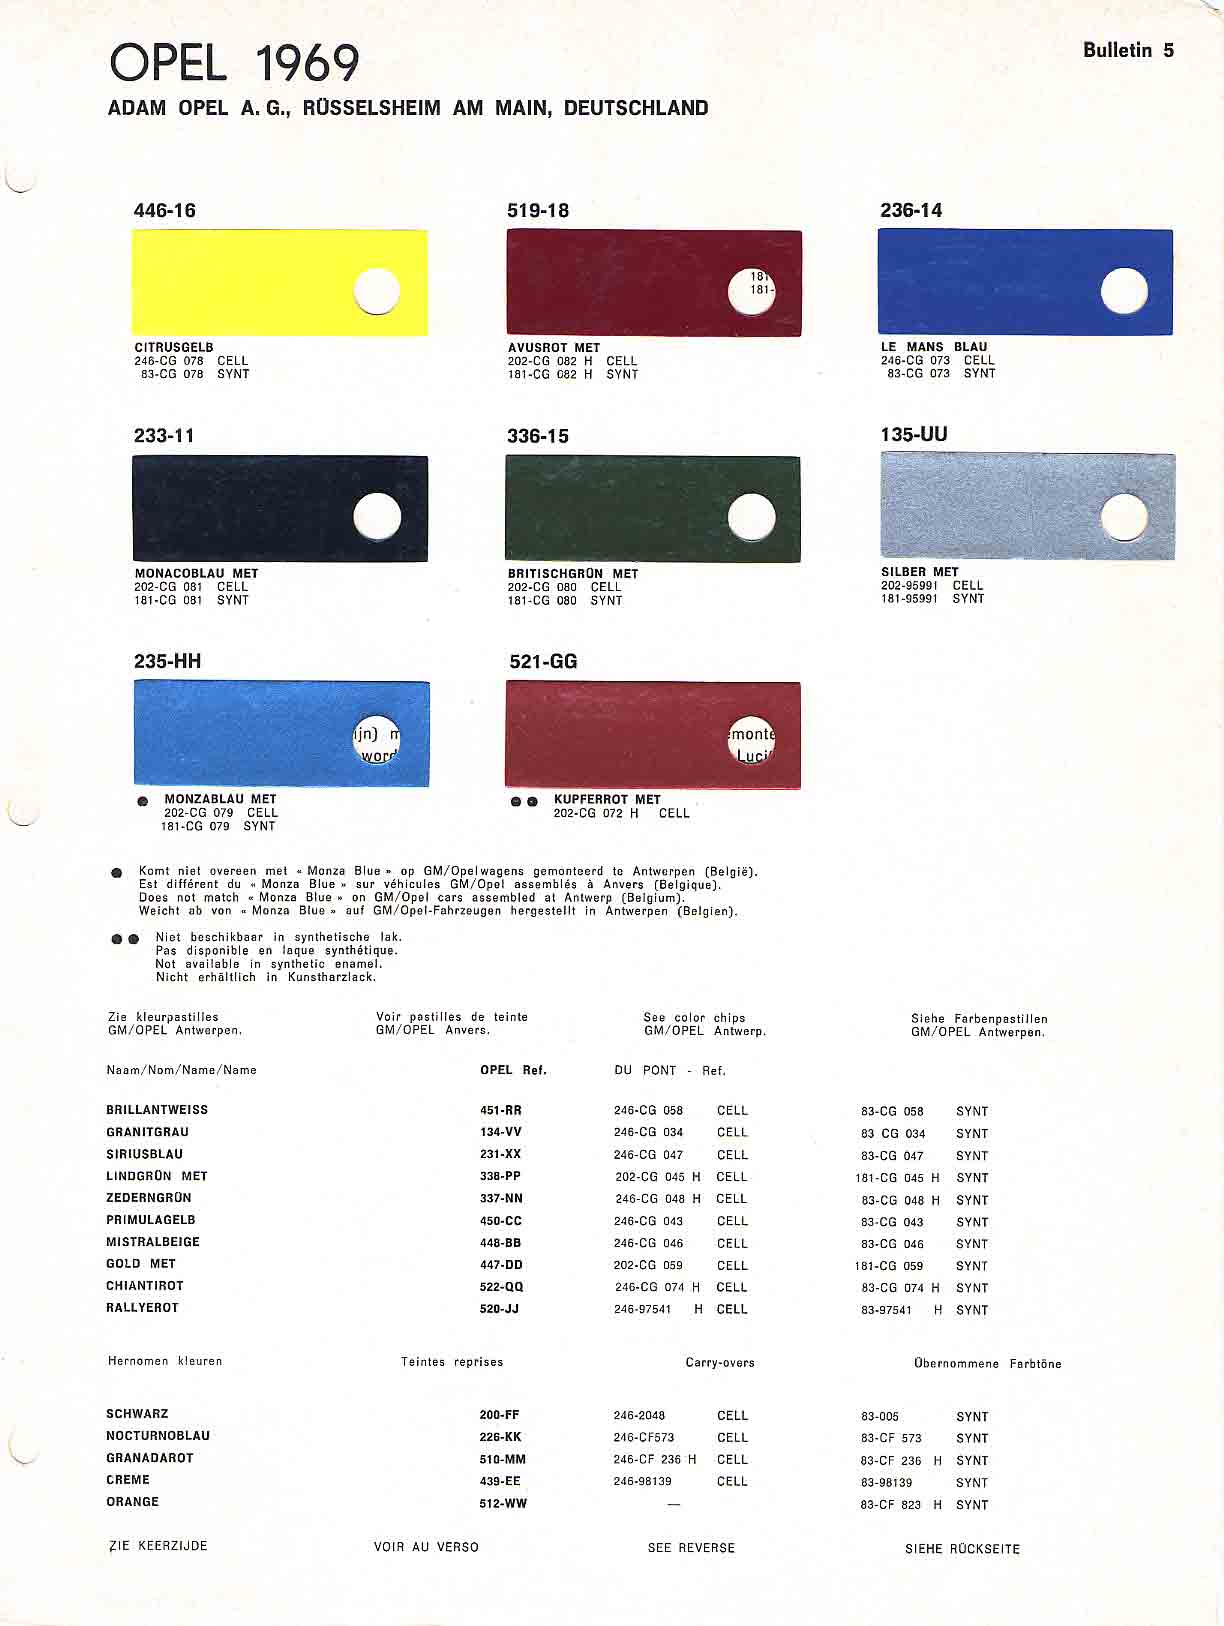 Opel Paint Codes & Color Charts